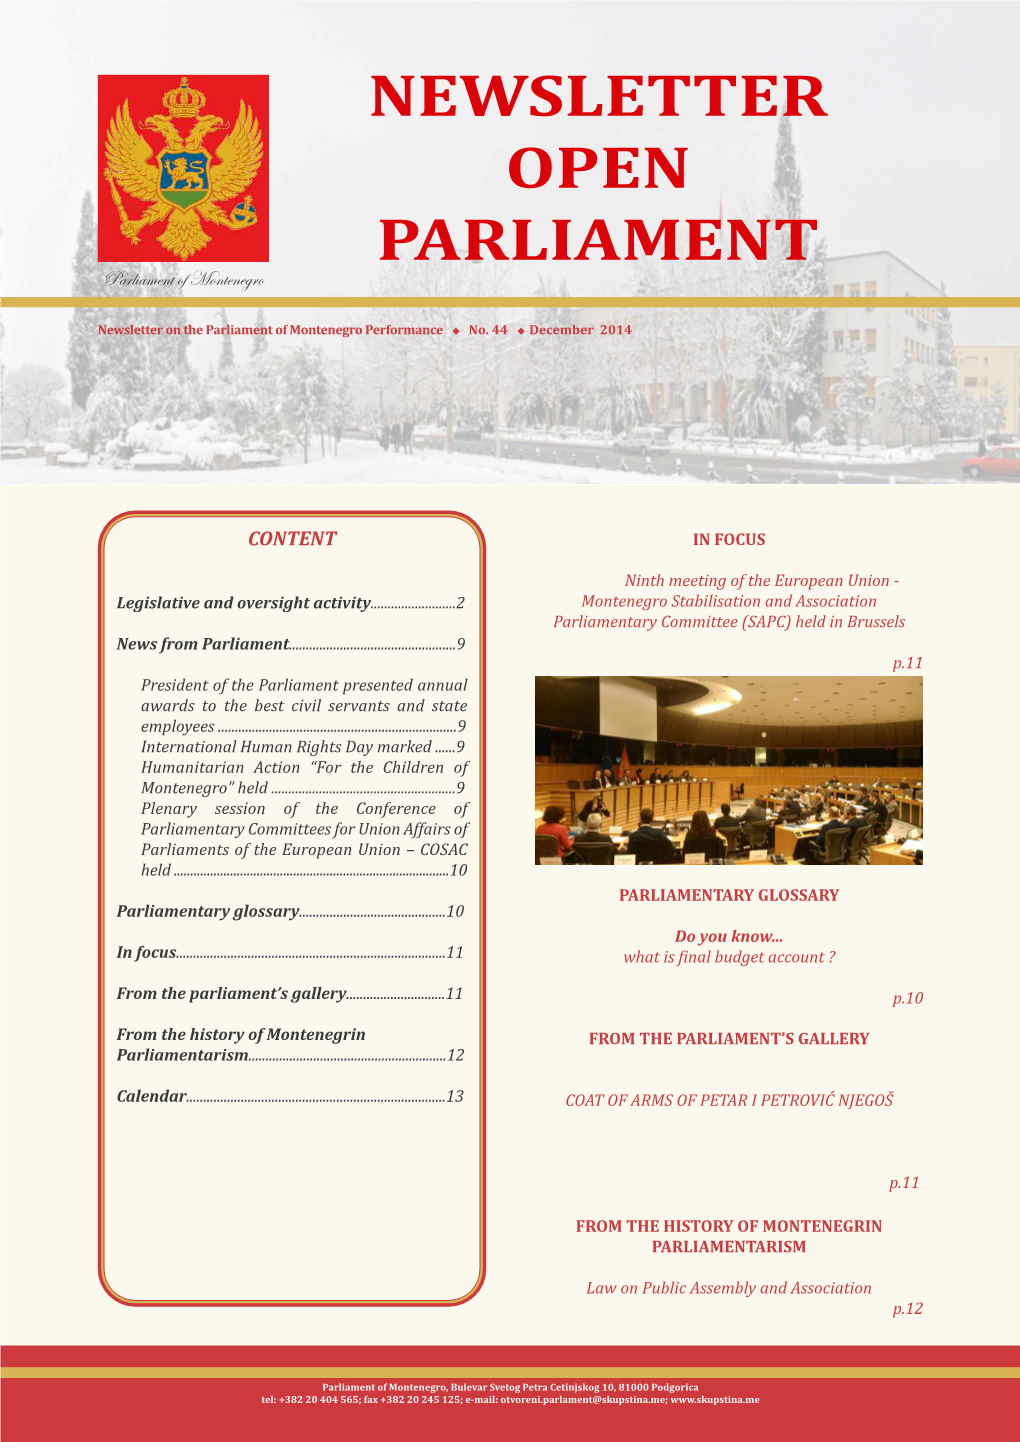 Open Parliament”, Prepared by Parliamentary Service